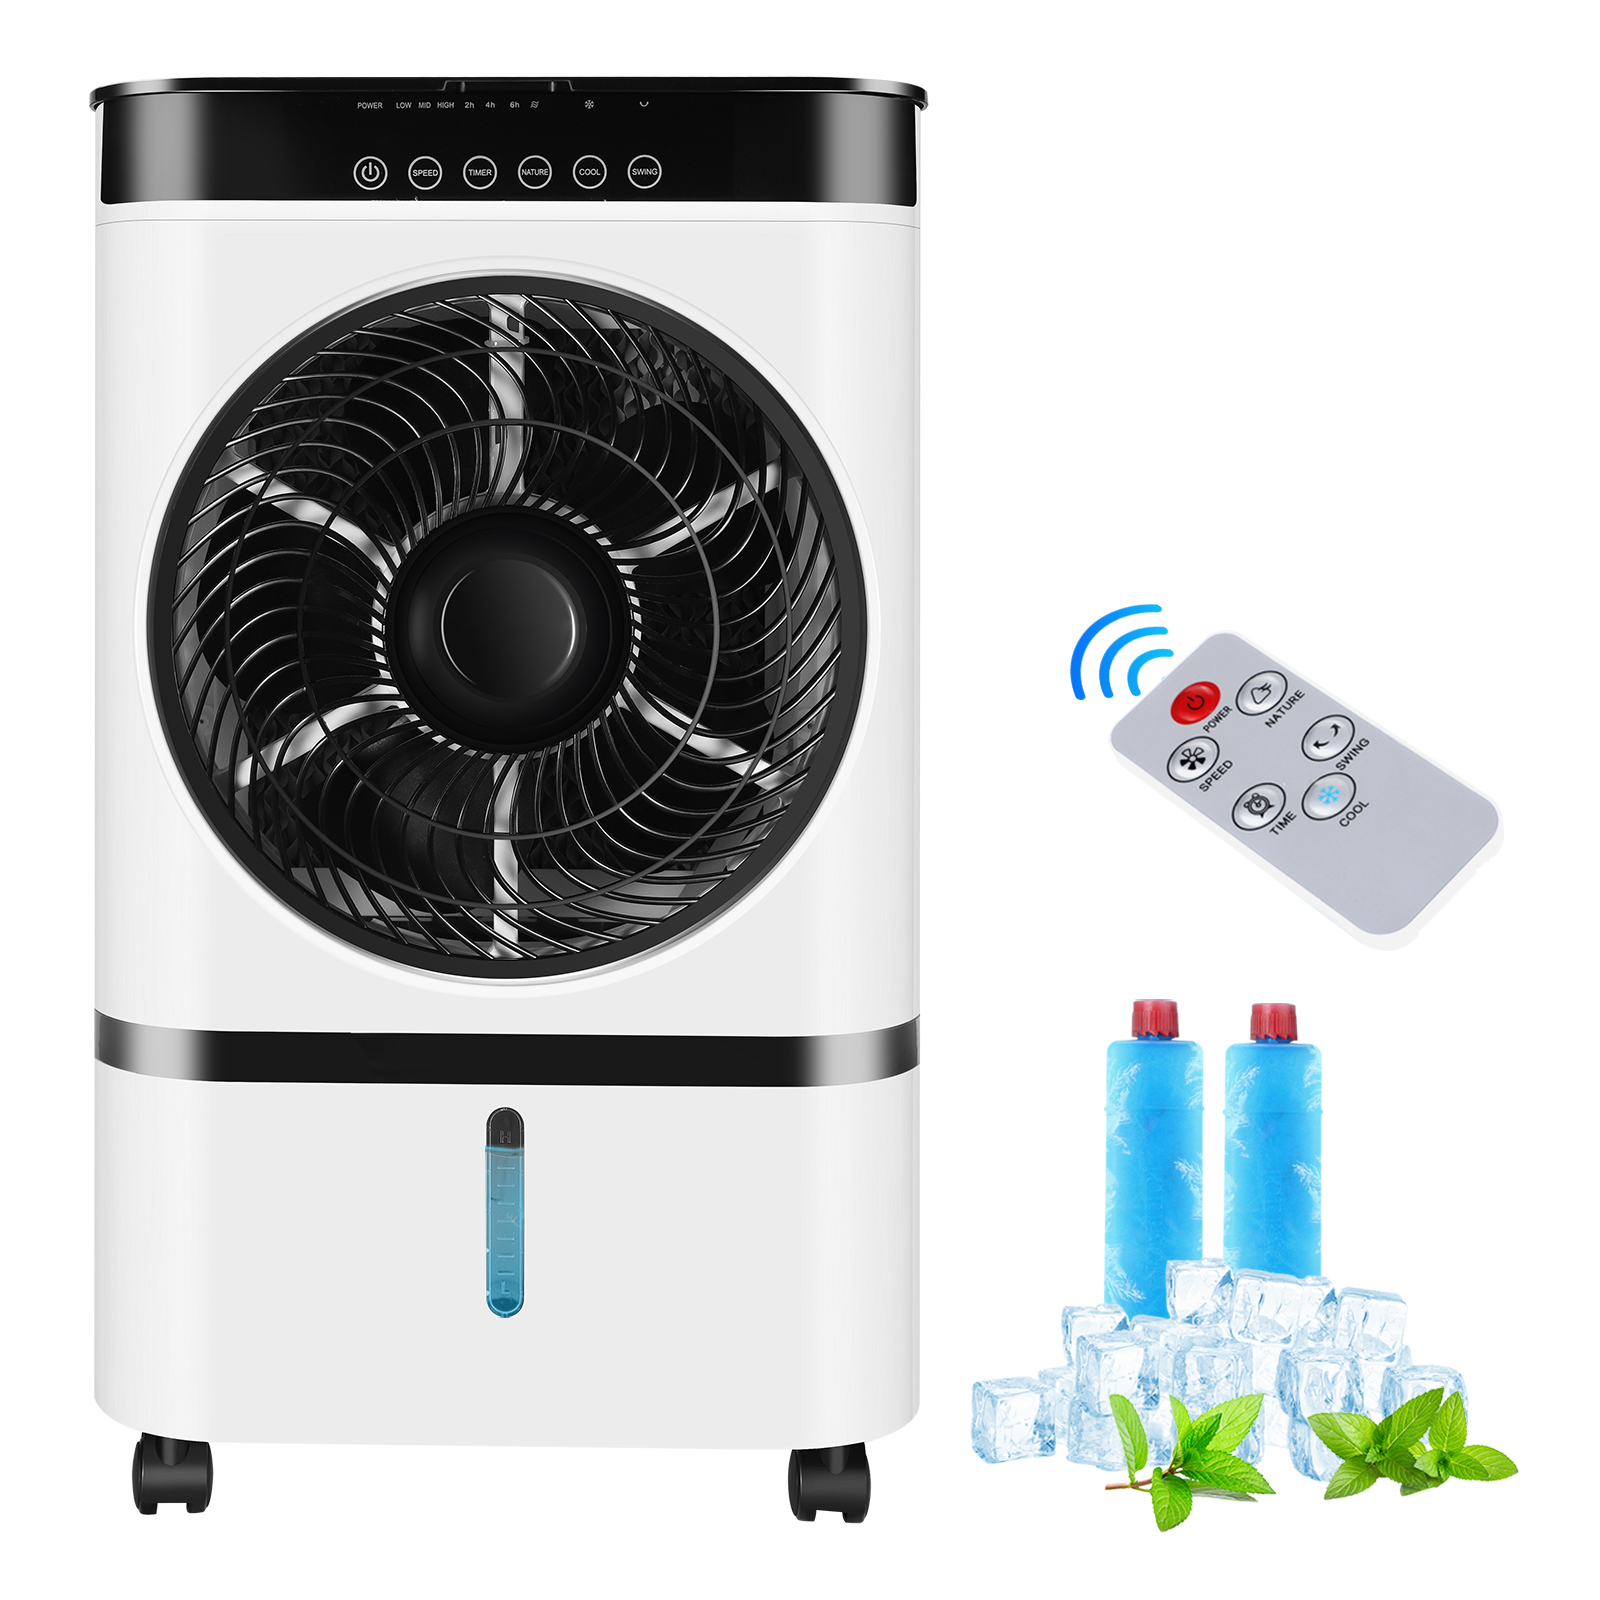 YouYeap Air Cooler Portable Evaporative Air Cooler Fan with Remote Control Casters Suitable for Home Office - image 1 of 9